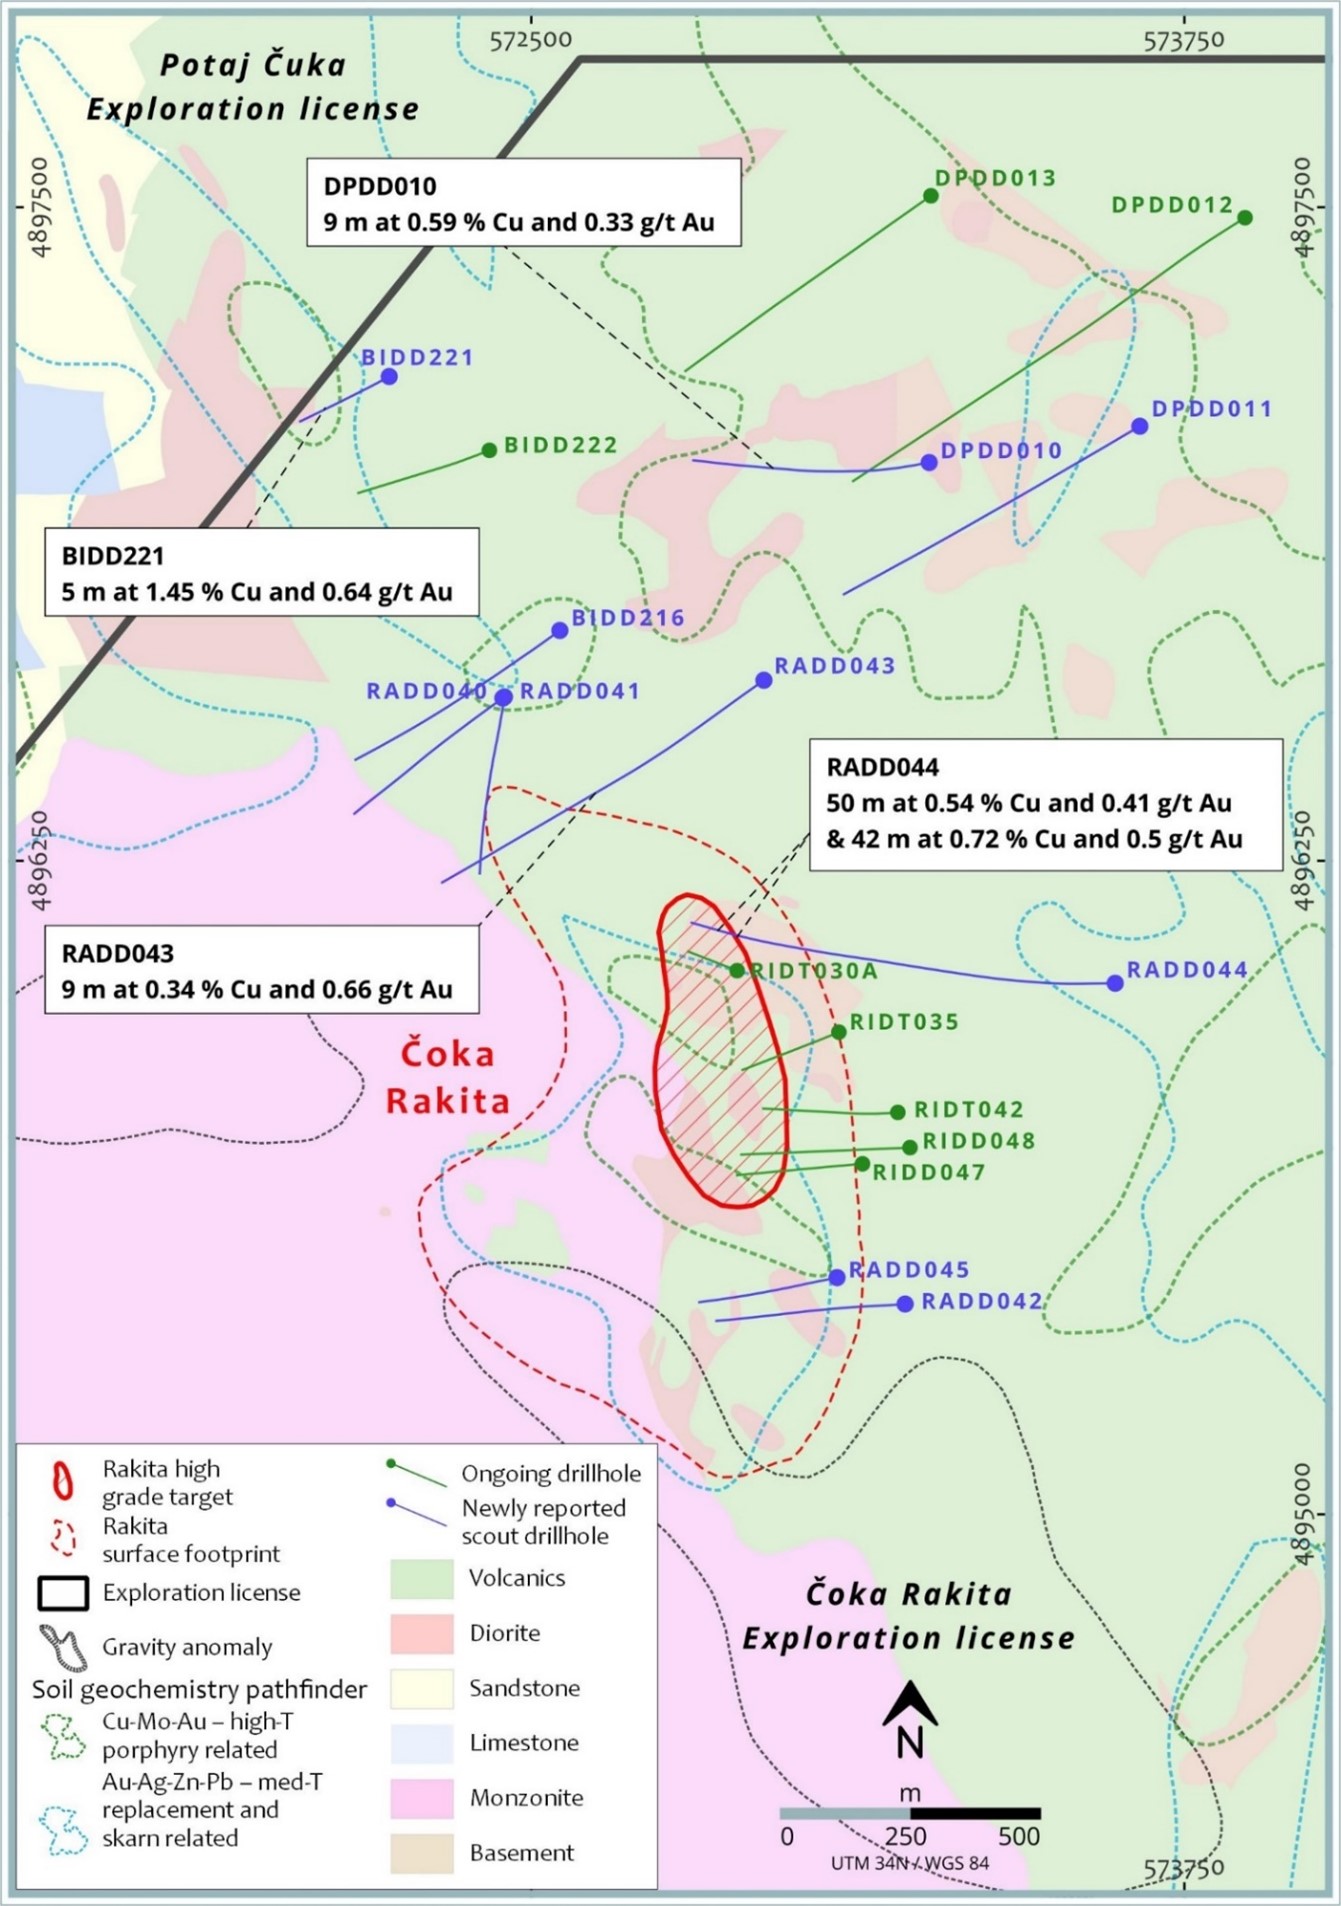 Overview map of Coka Rakita exploration licence outlining the progress of the scout drilling campaign, including ongoing holes.